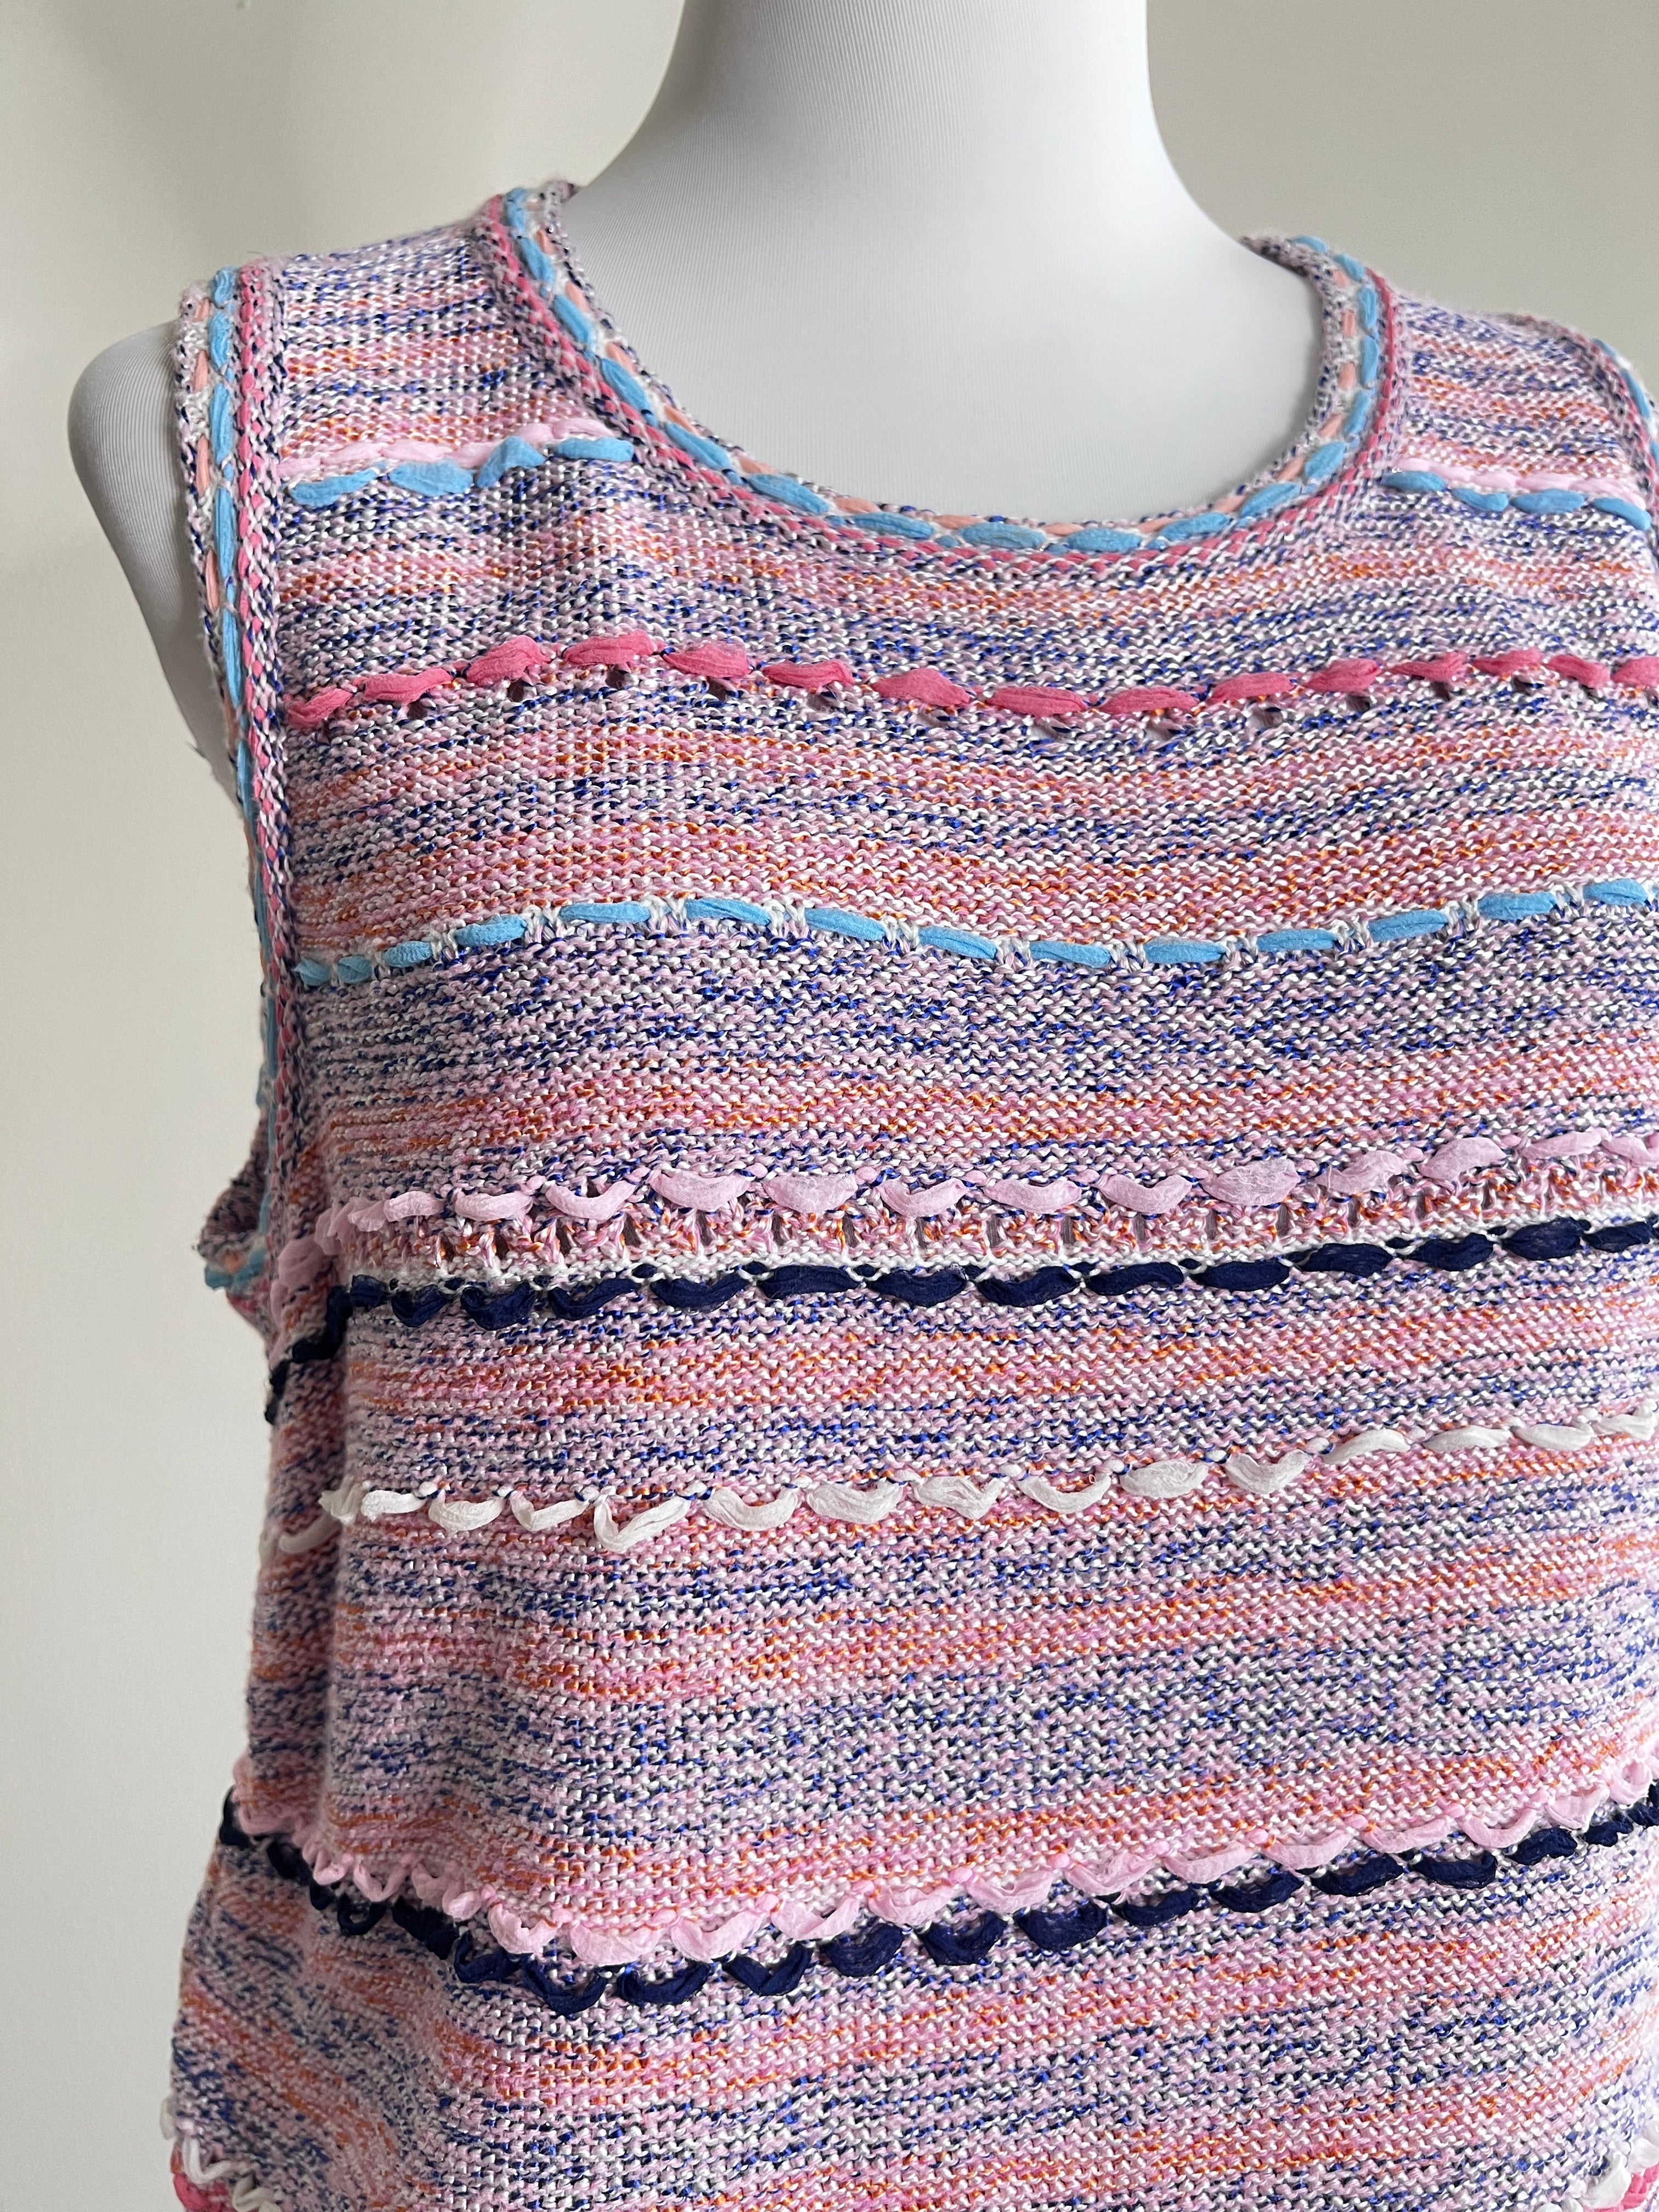 A set of Multicolor Tweed Tank Top and shorts - CHANEL